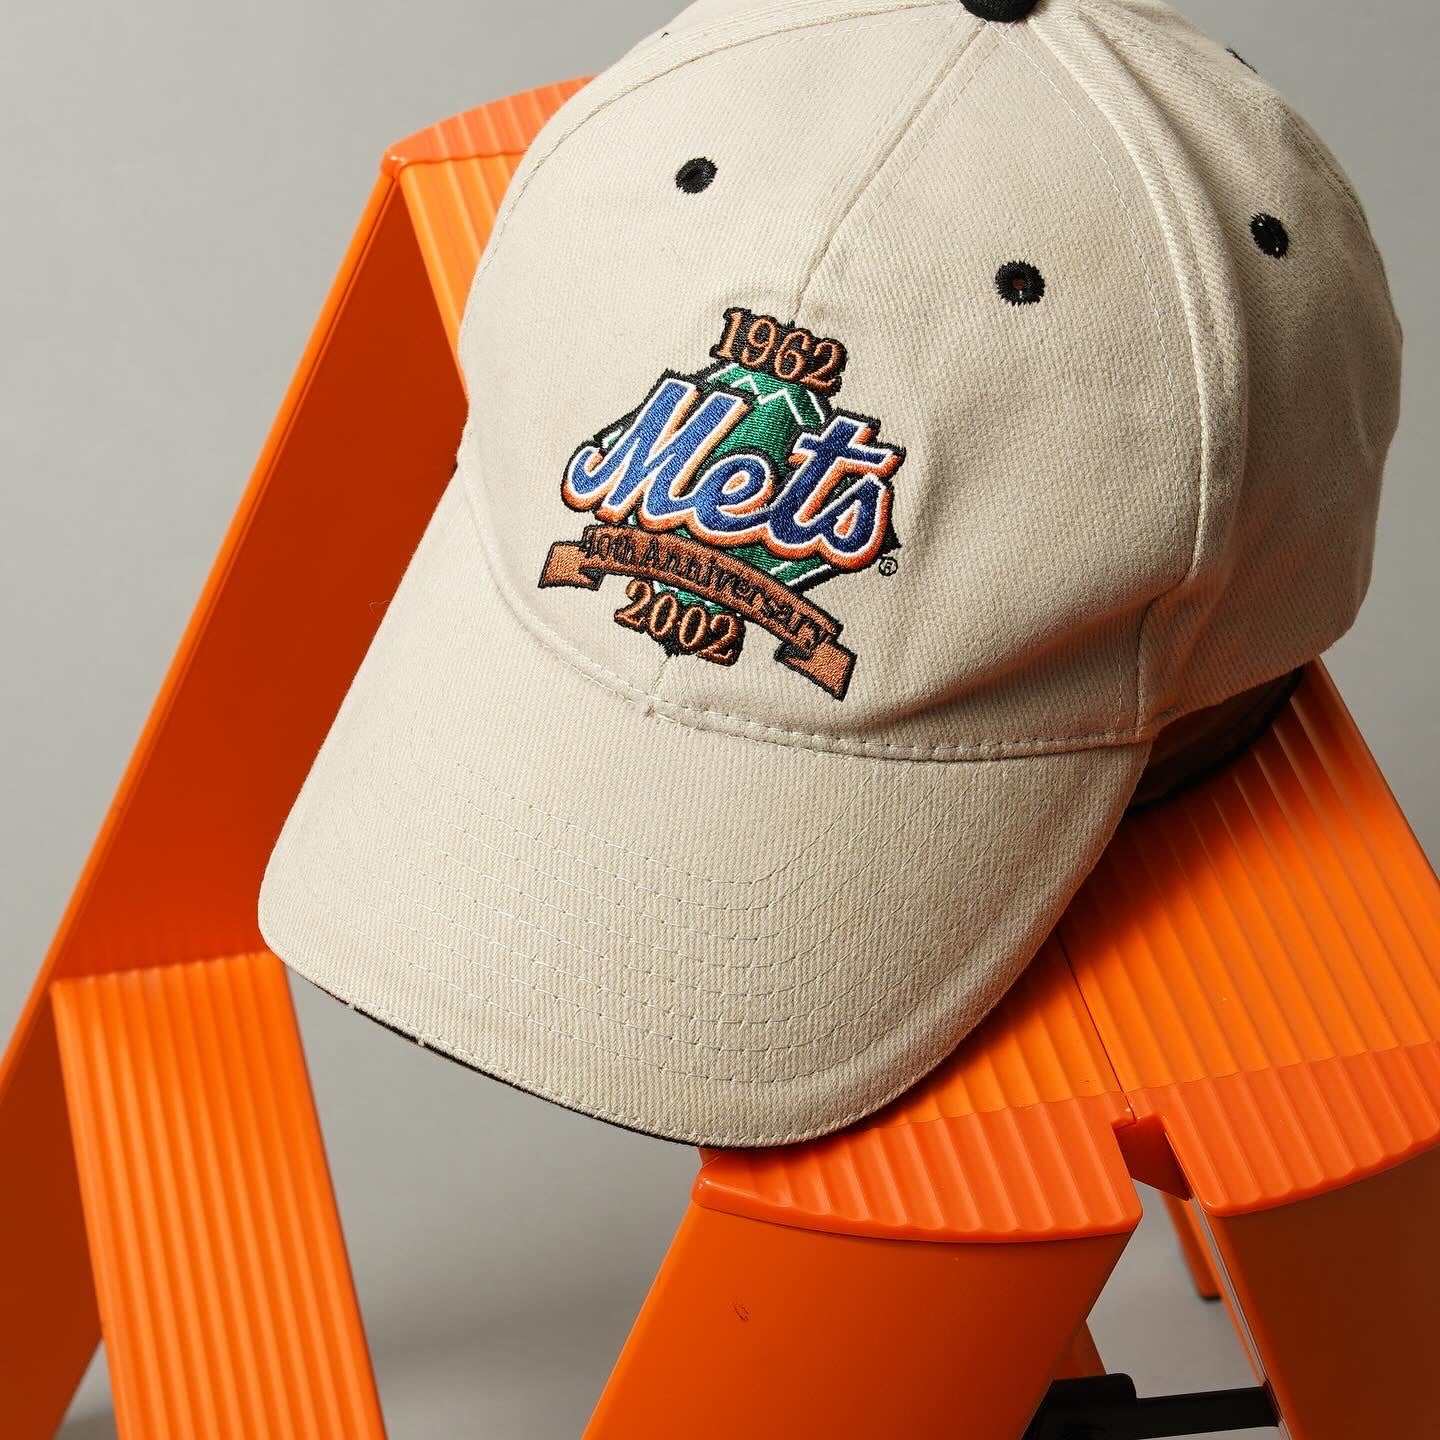 New York Mets 1962-2002 40th Anniversary Cap by FOX MSG NETWORK